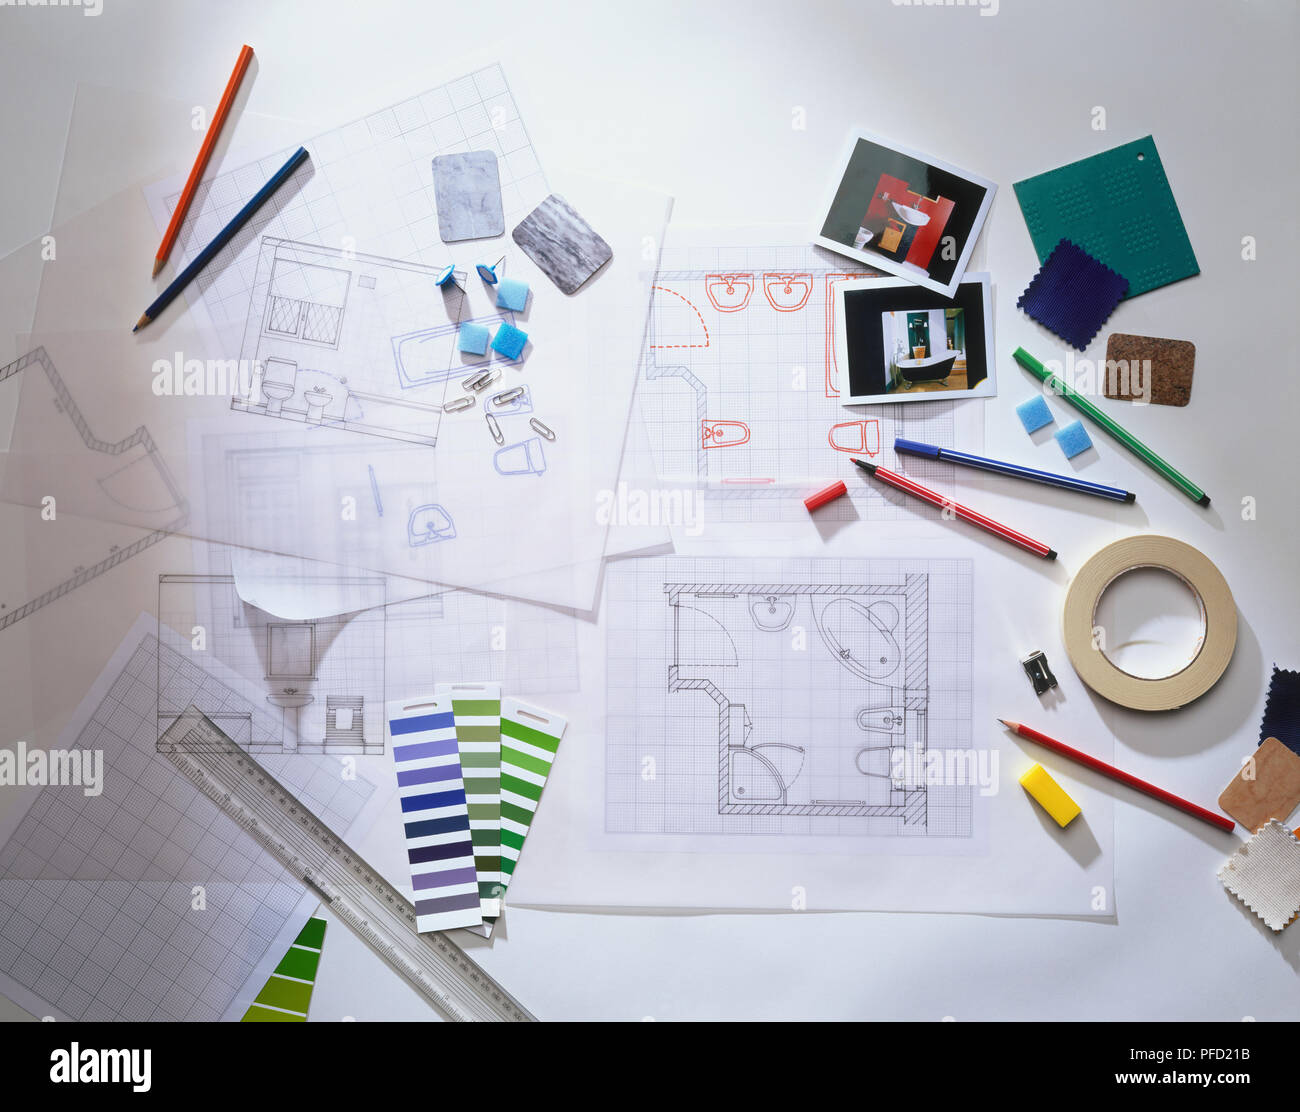 Interior design materials including floor plans on graph paper, tracing paper, colour samples, pens, pencils, pencil sharpener, ruler, photographs, tiles, masking tape and drawing tacks, view from above. Stock Photo